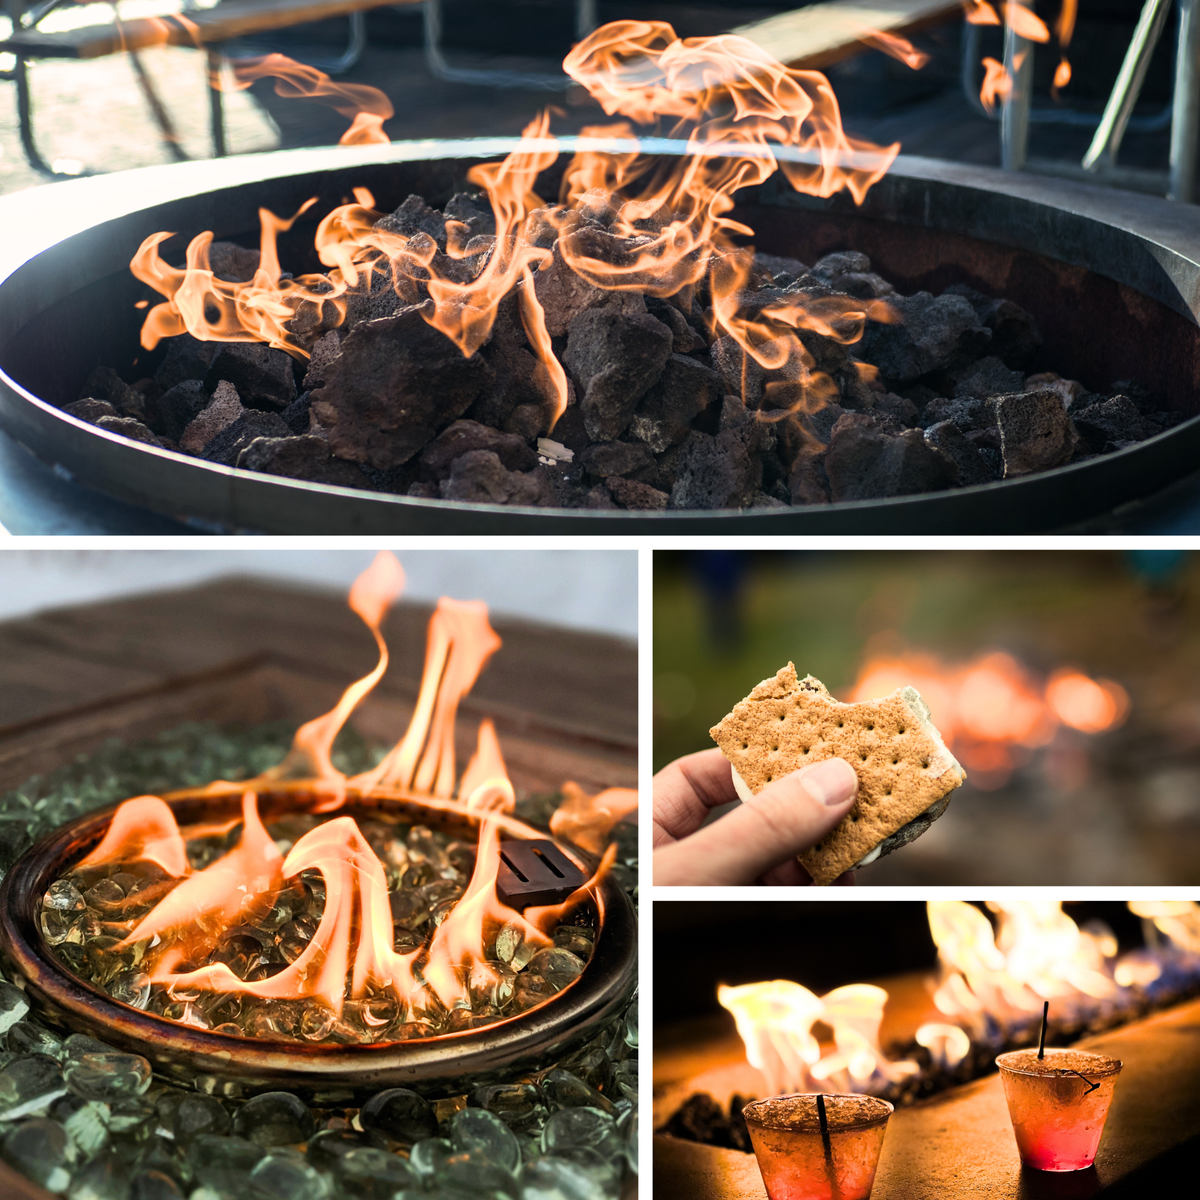 Gas Firepits, S'mores by the fire, drinks by the fireplace